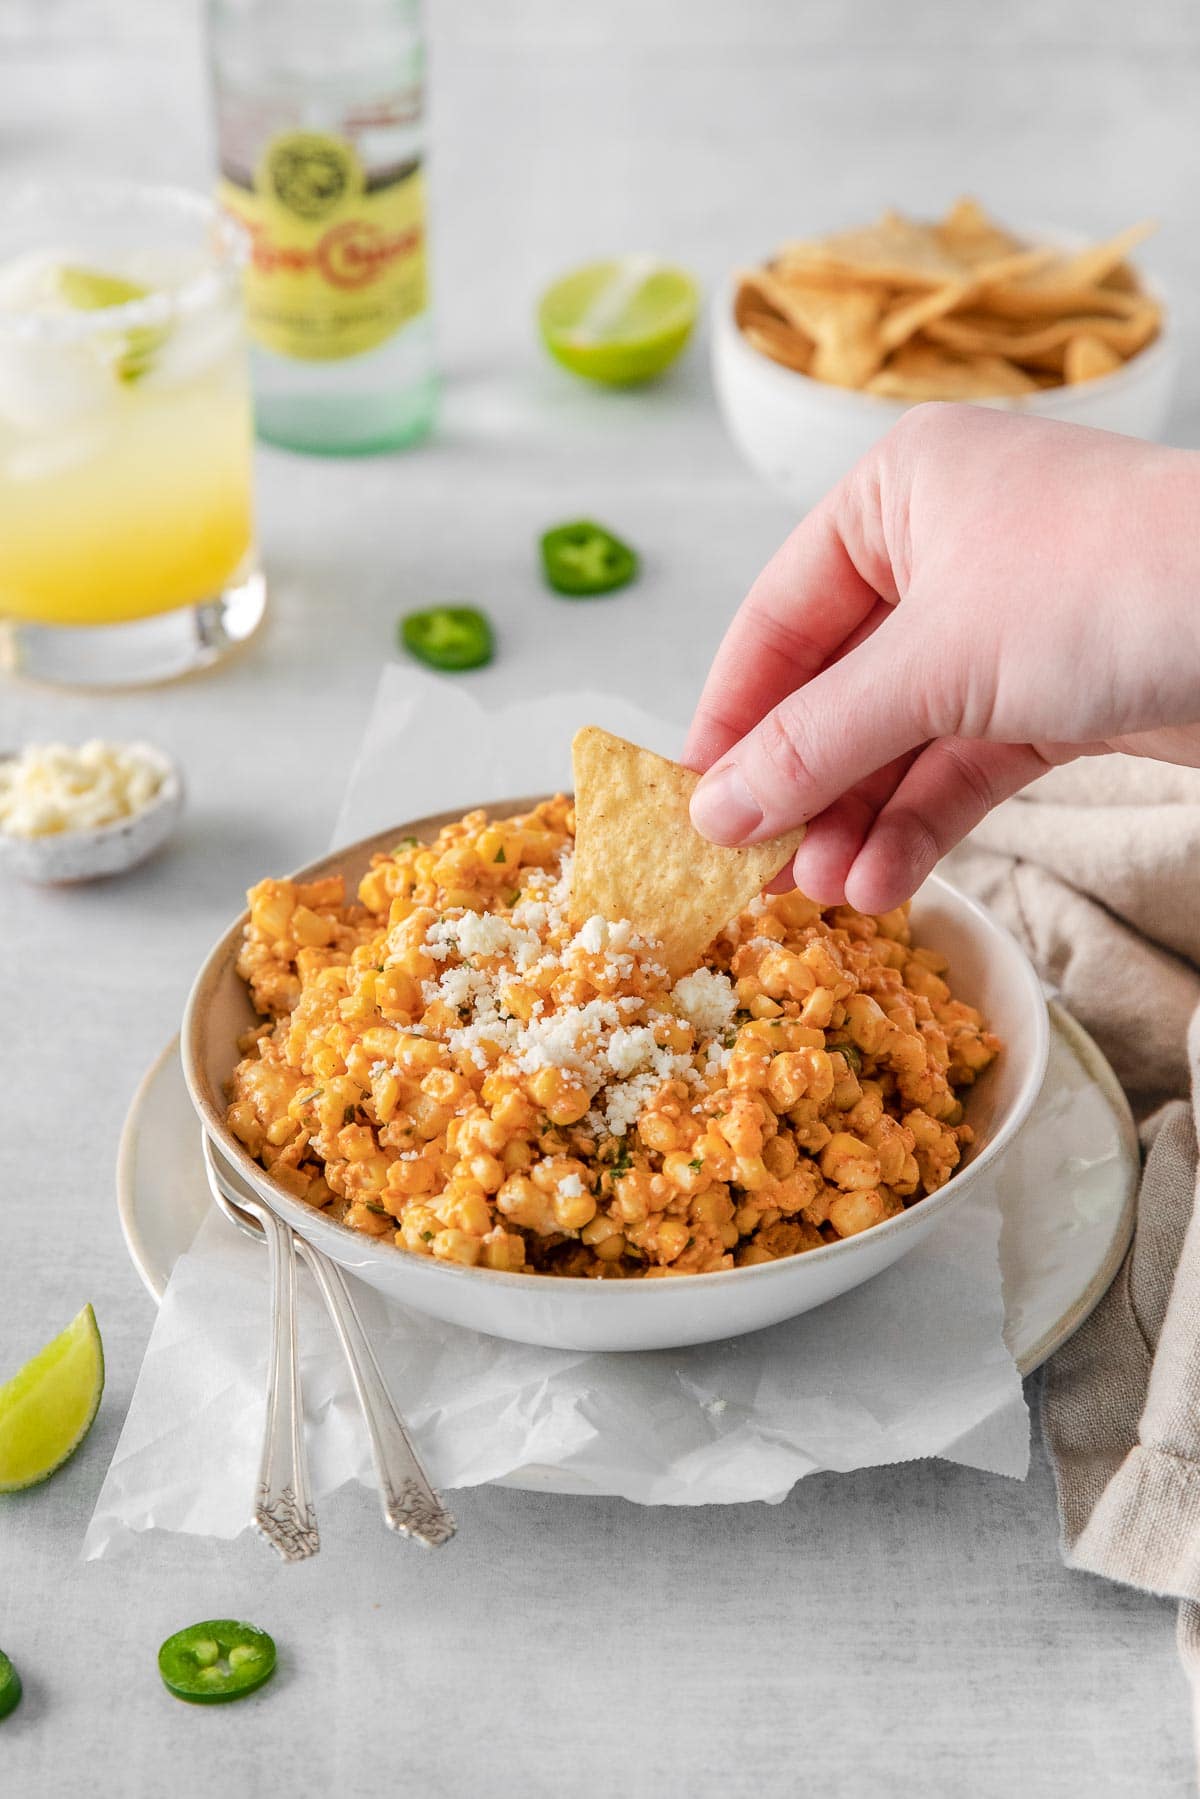 tortilla chip being dipped into corn dip that is topped with crumbled white cojito cheese